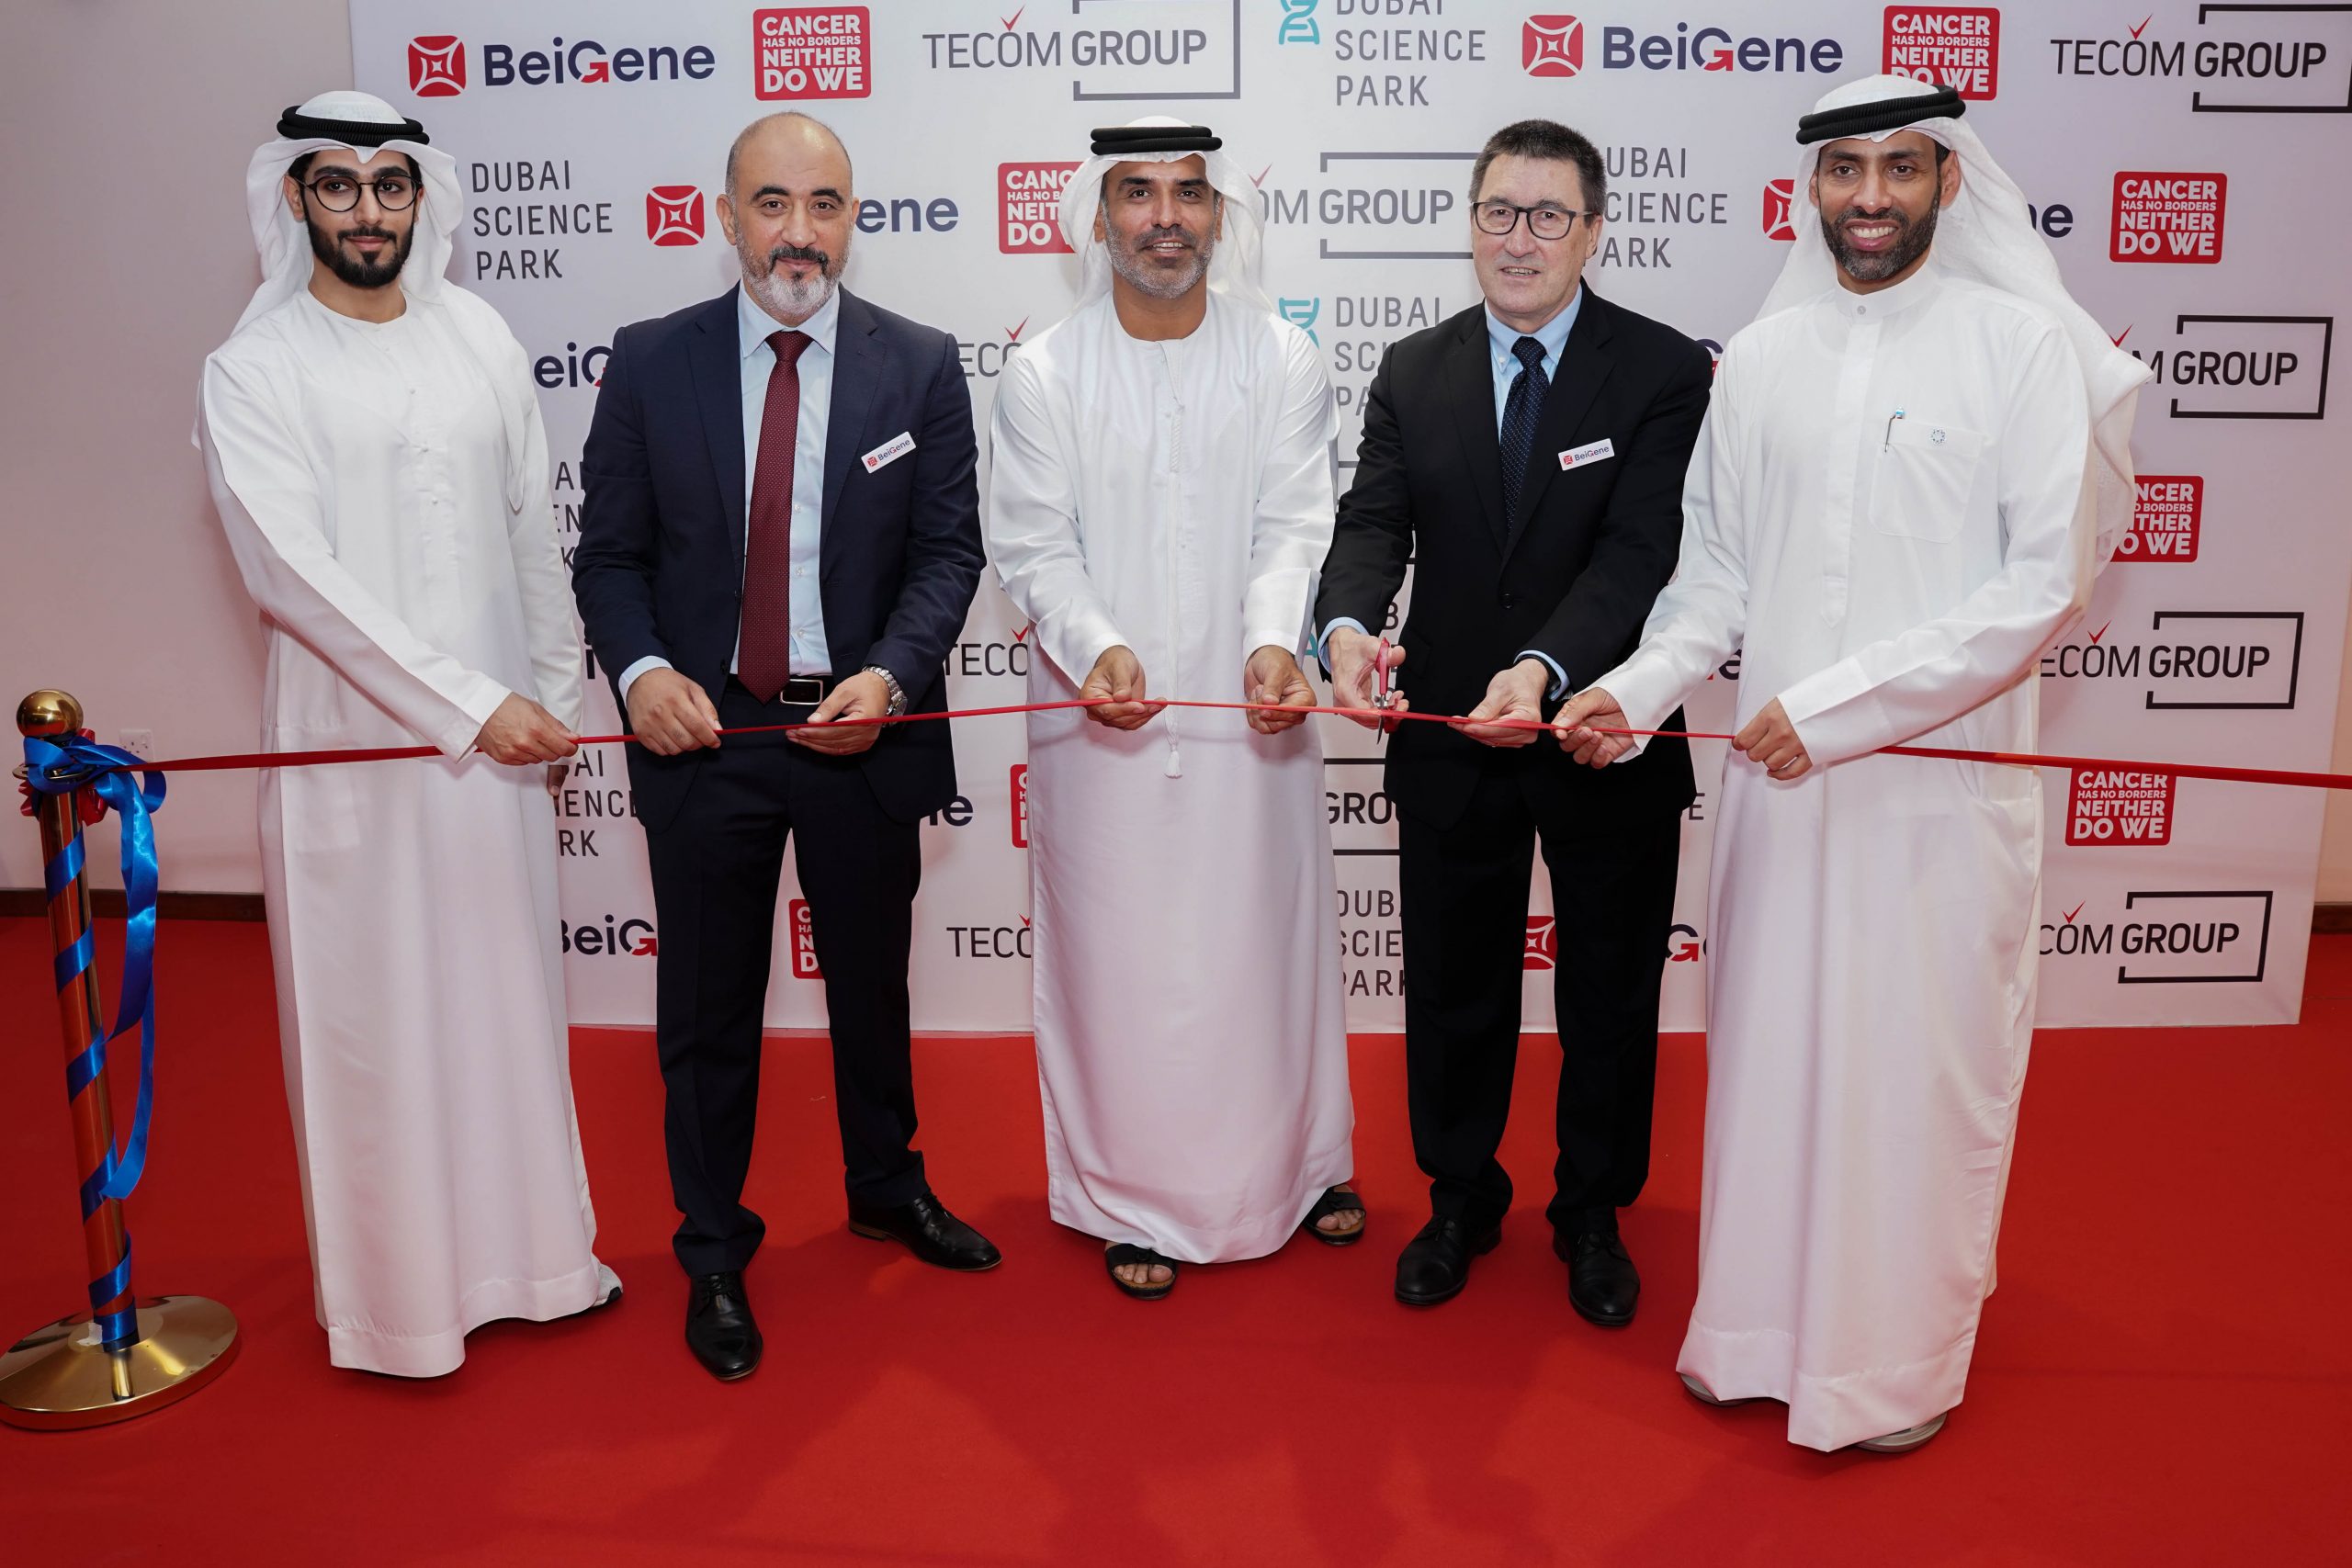 BeiGene Expands Presence in Middle East and North Africa Region